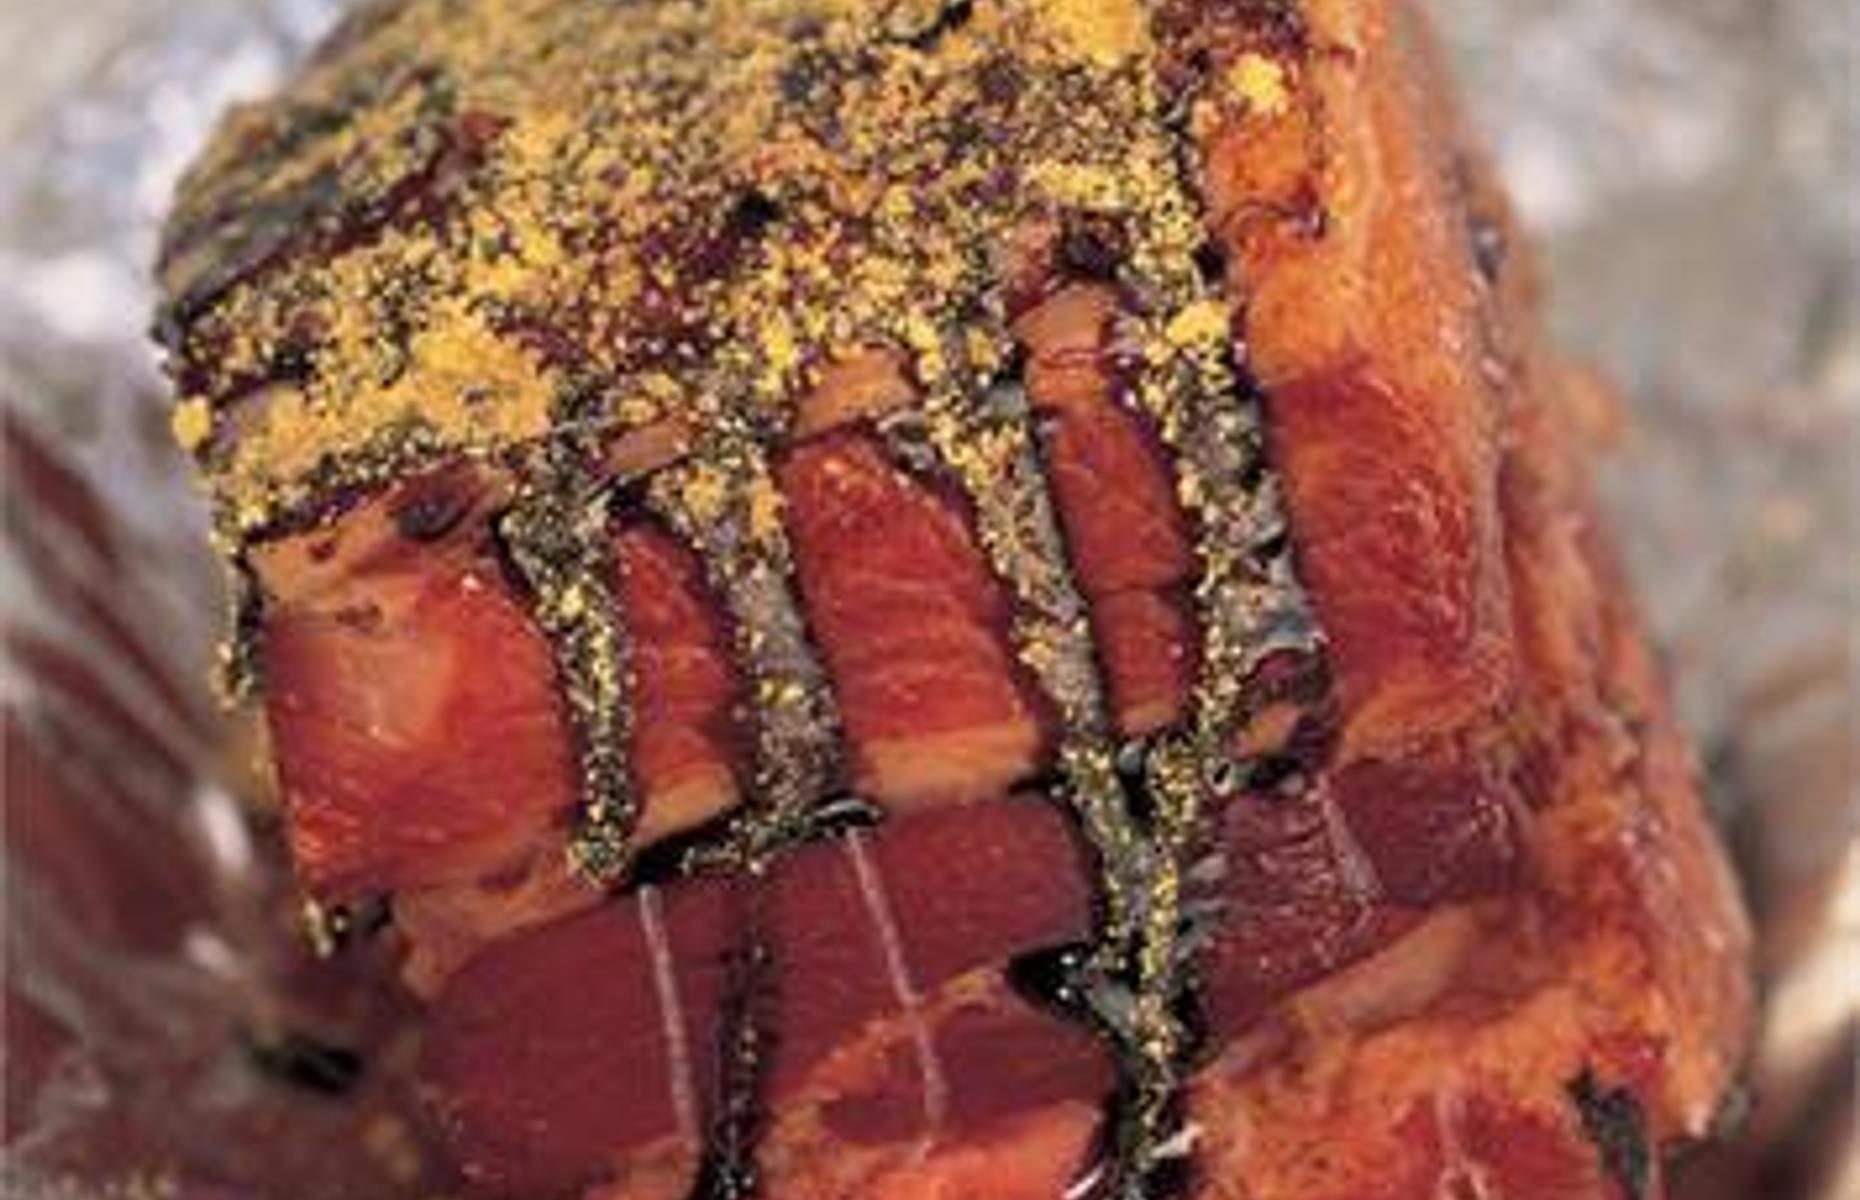 <p>It's now more than 20 years since Nigella suggested forgetting about the traditional honey and mustard glaze and instead introduced fans to the idea of cooking ham in Coca-Cola. The recipe, which appeared in the <em>Nigella Bites</em> cookbook, has more than stood the test of time. As she said in 2014: “Only those who have never tried this raise an eyebrow at the idea. Don't hesitate, don't be anxious: this really works.” Nigella also has recipes for ham cooked in ginger ale and cherry cola, but the sticky-sweet original is the standout favorite for us.</p>